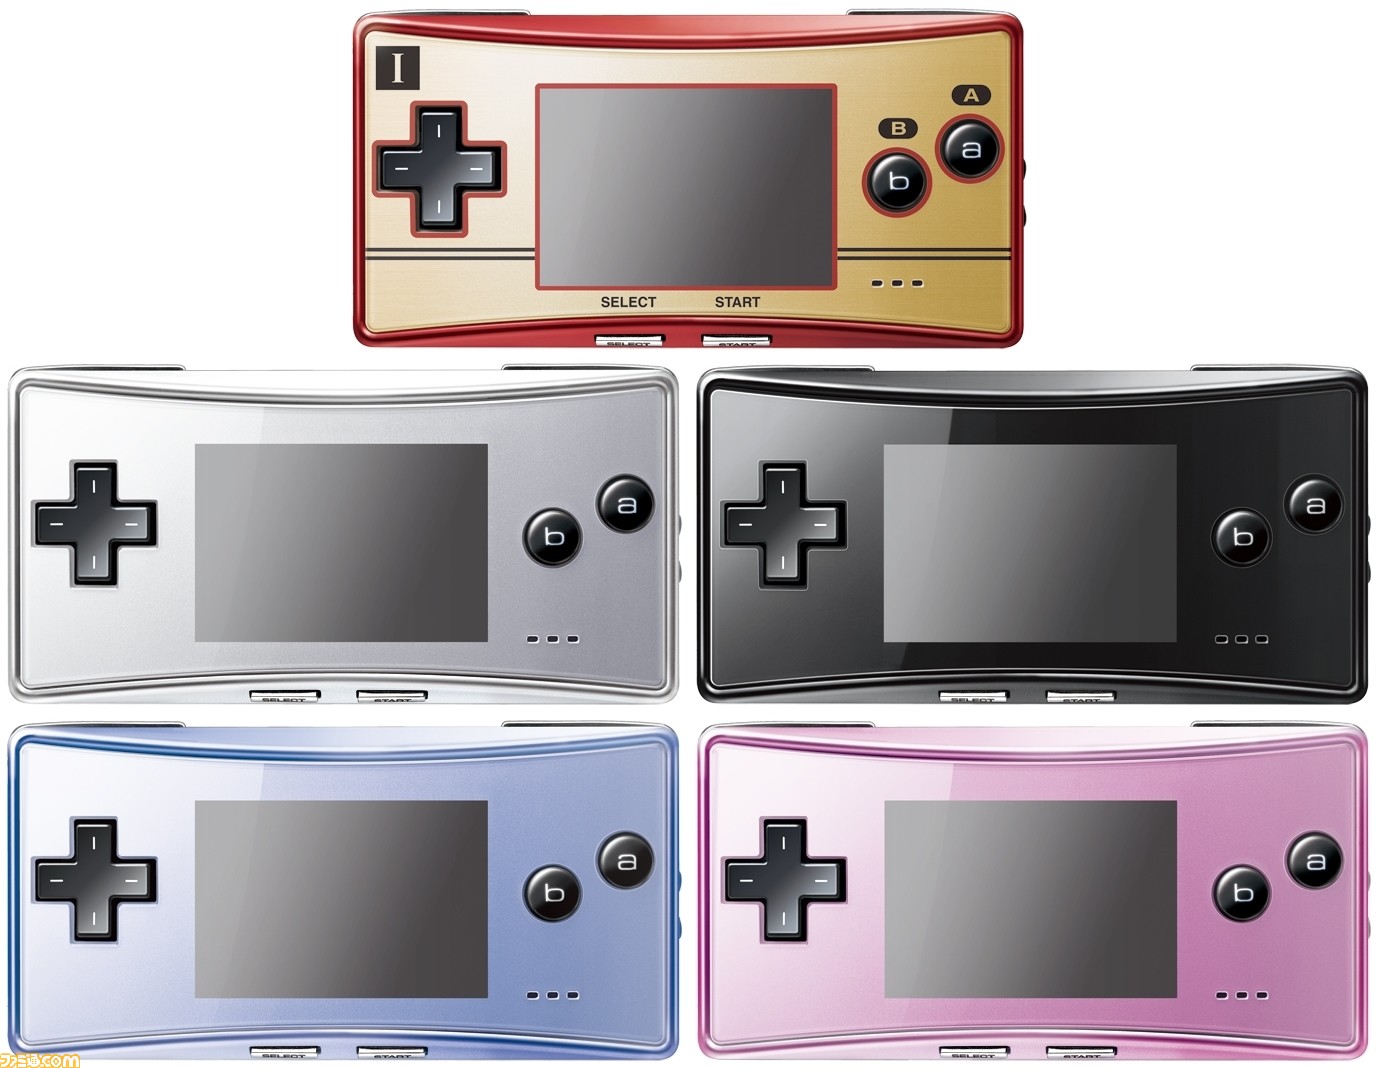 game boy micro mother 3